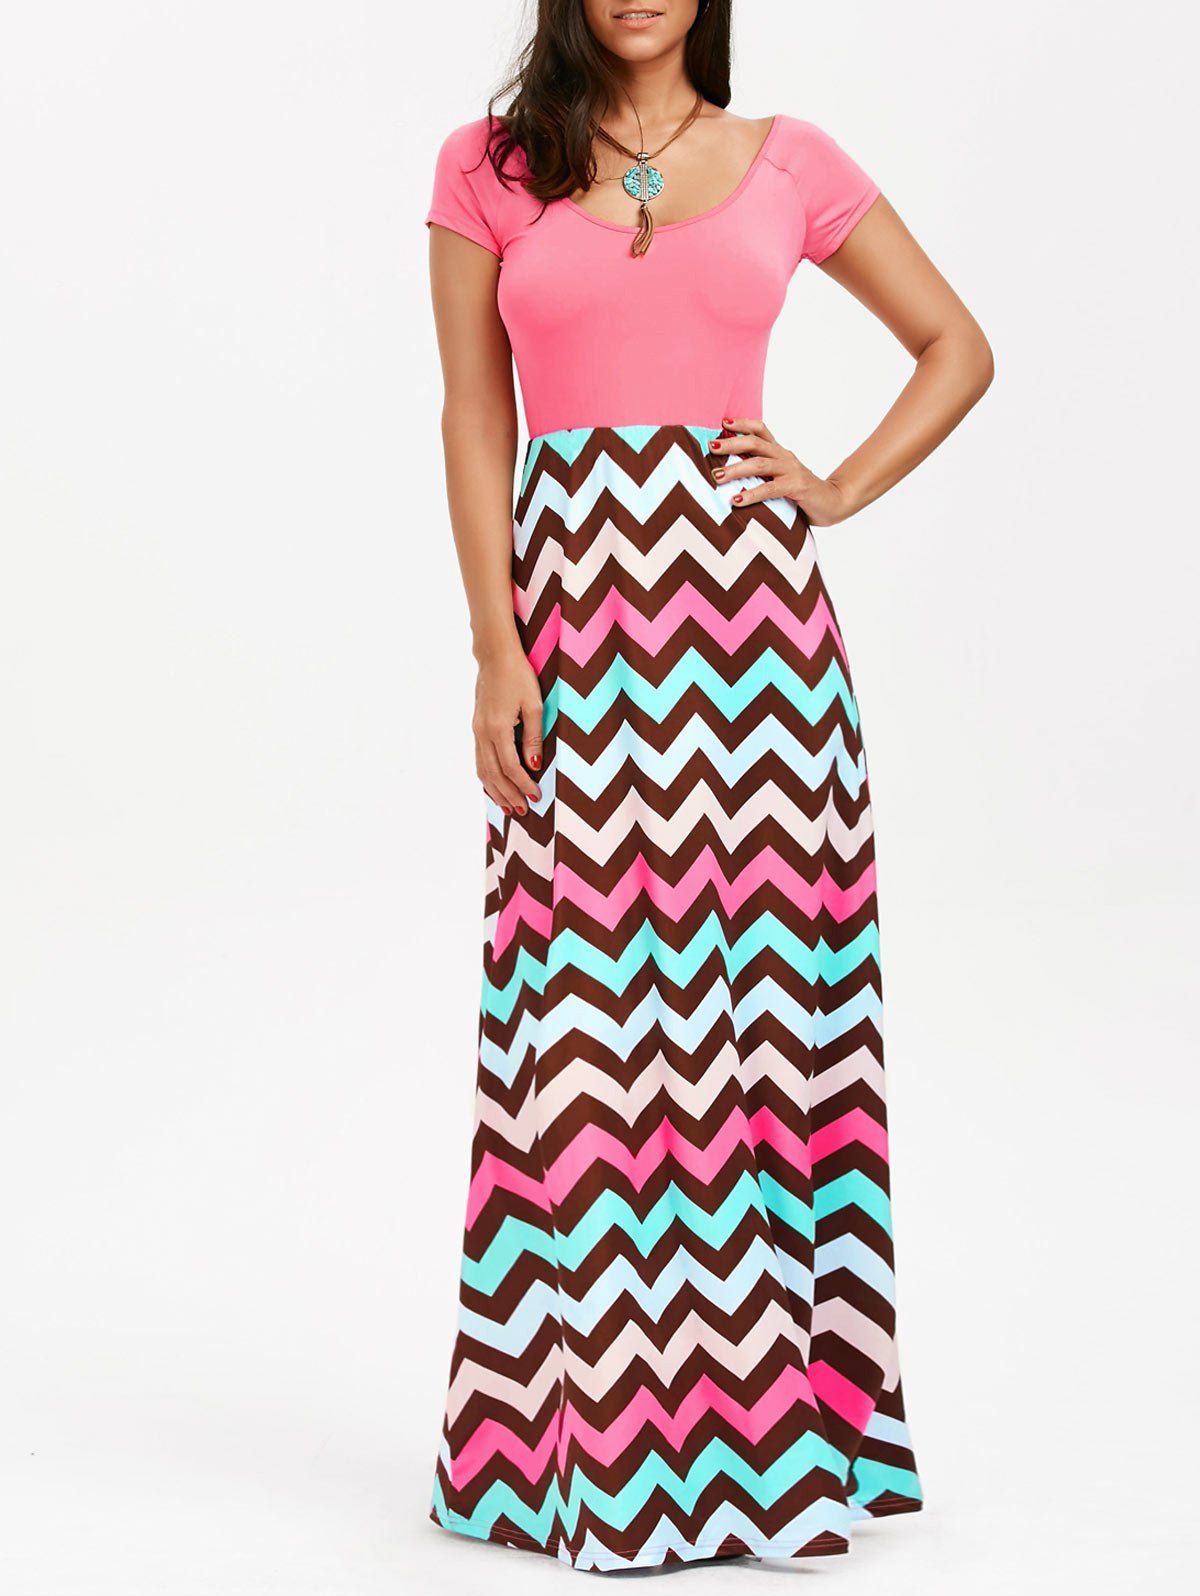 Outfit Scoop Neck Chevron Maxi Party Dress  